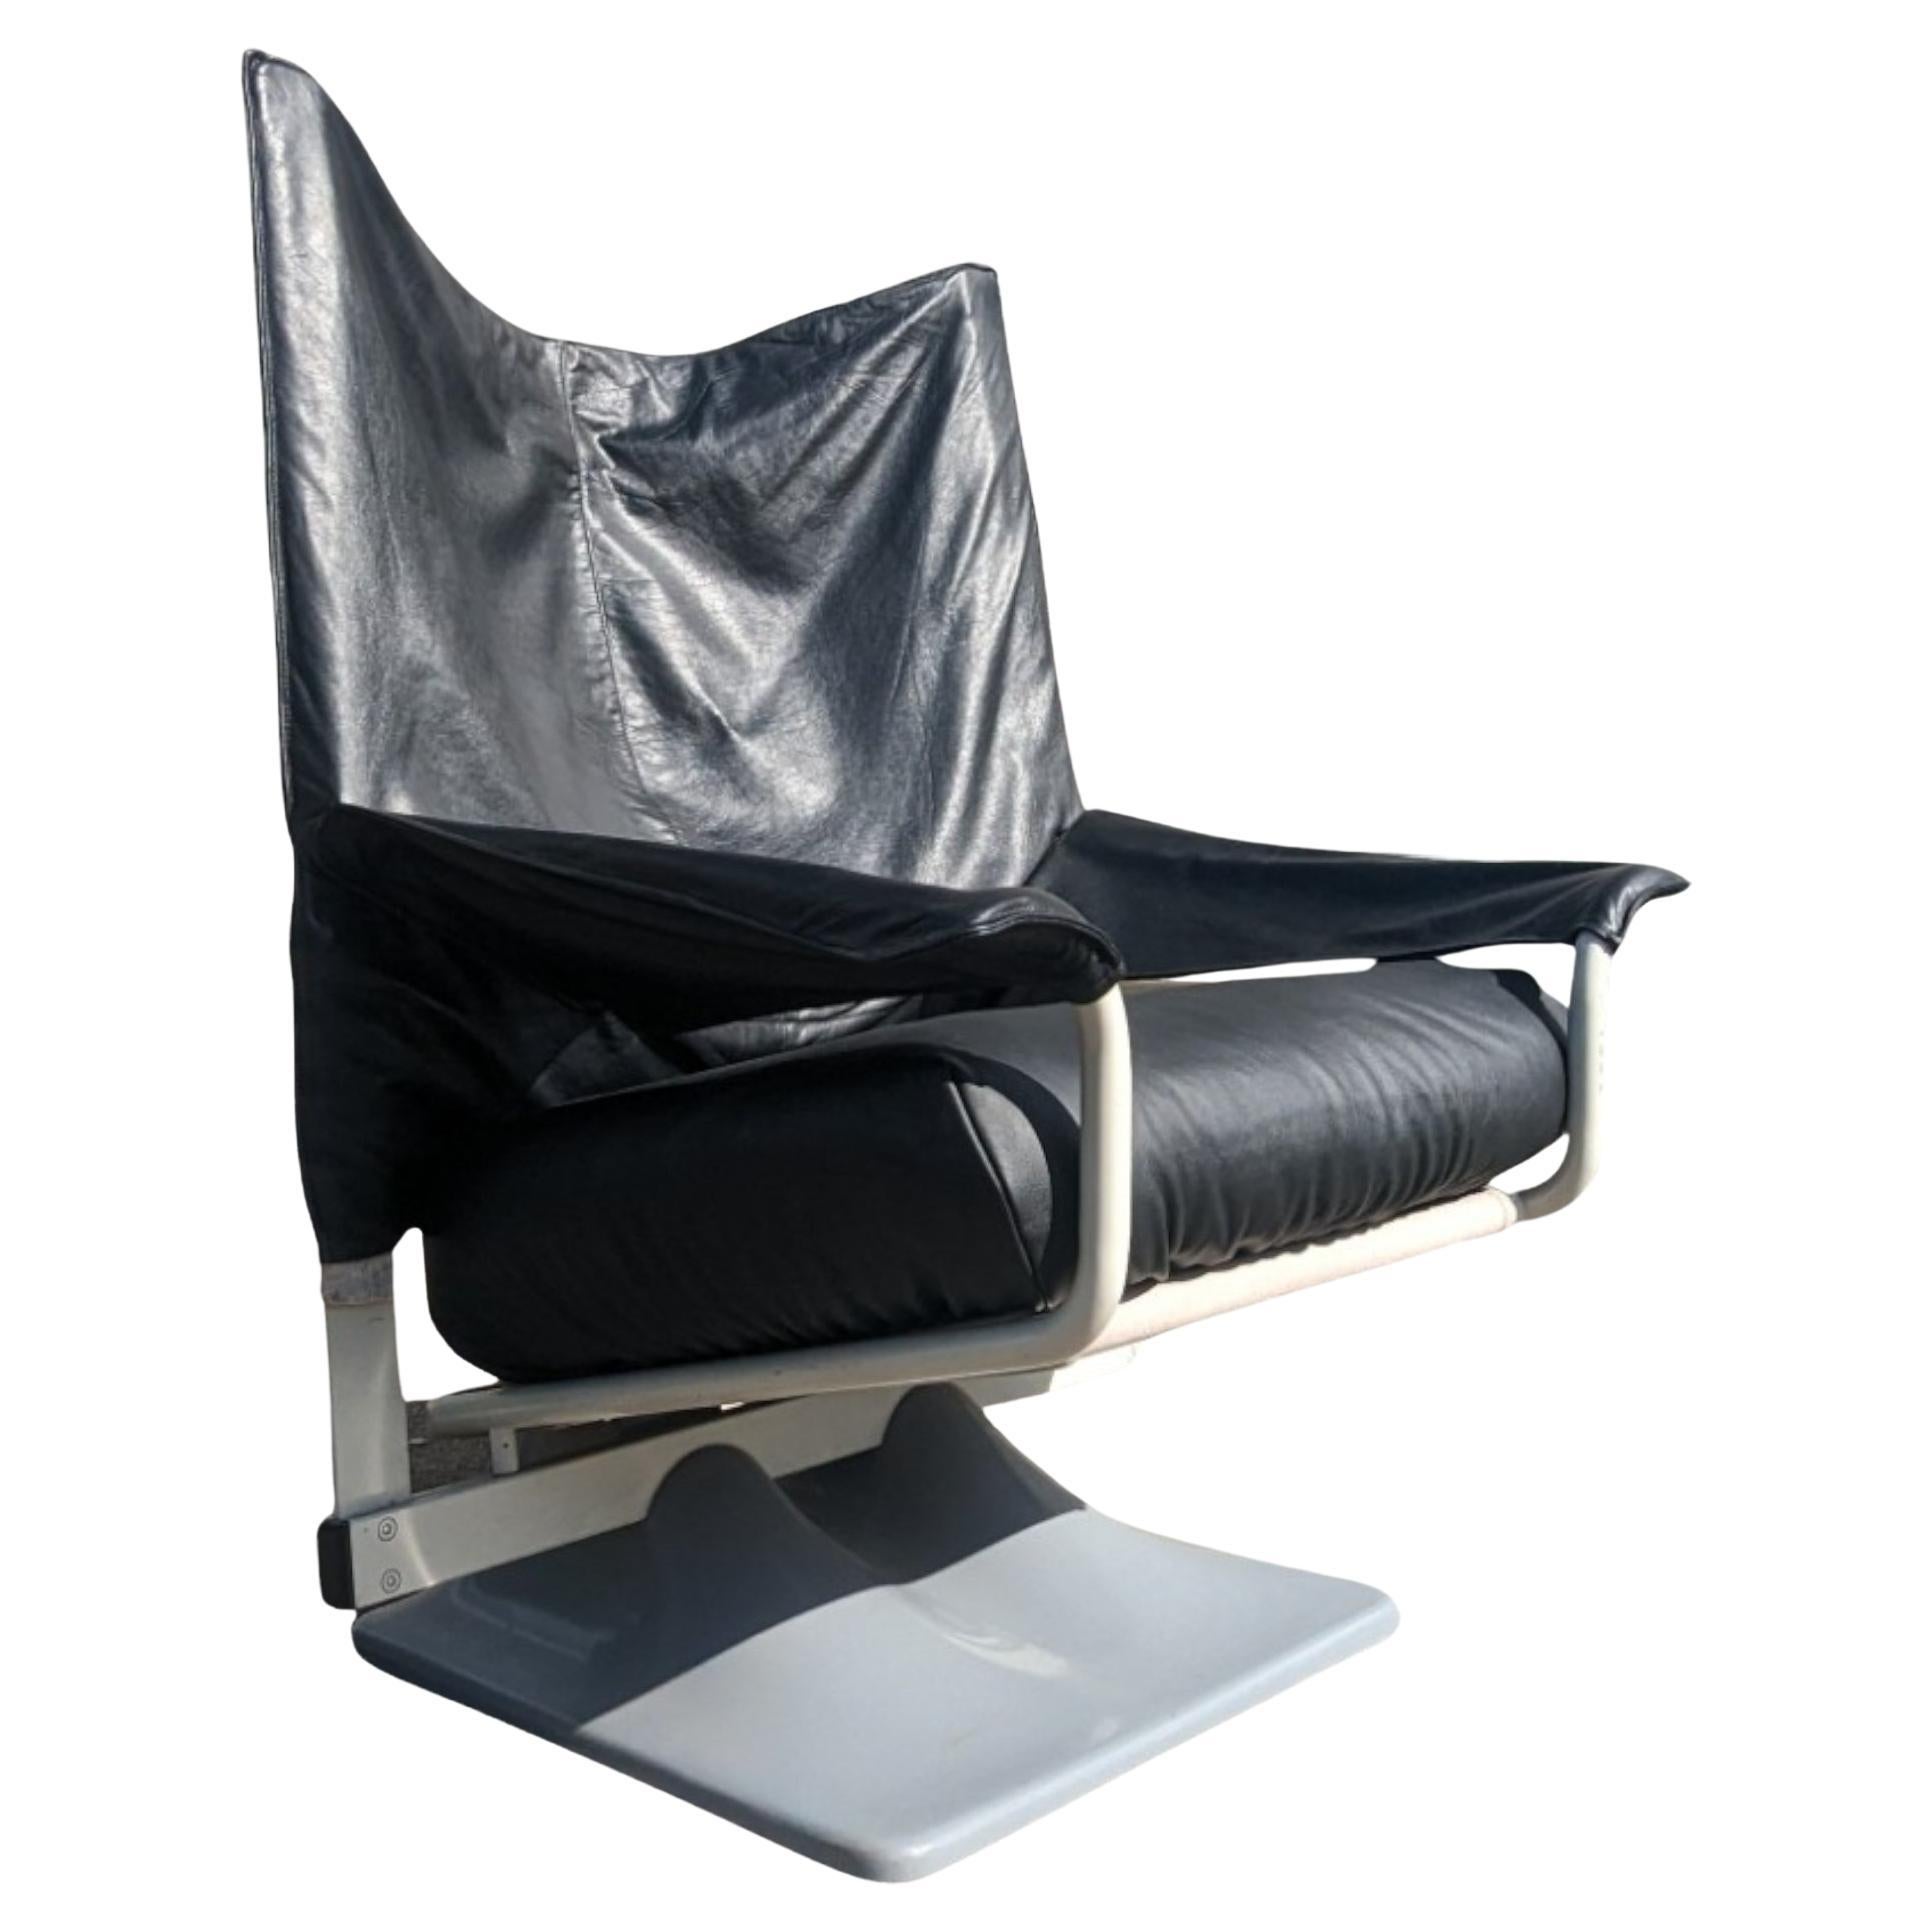 Product Description Full:
Authentic AEO chair by Paolo Deganello for Cassina in lovely black leather with gold metallic  sheepskin OR black on black OR brown on gold OR brown on black. Peixe is for one of these combinations although we have two